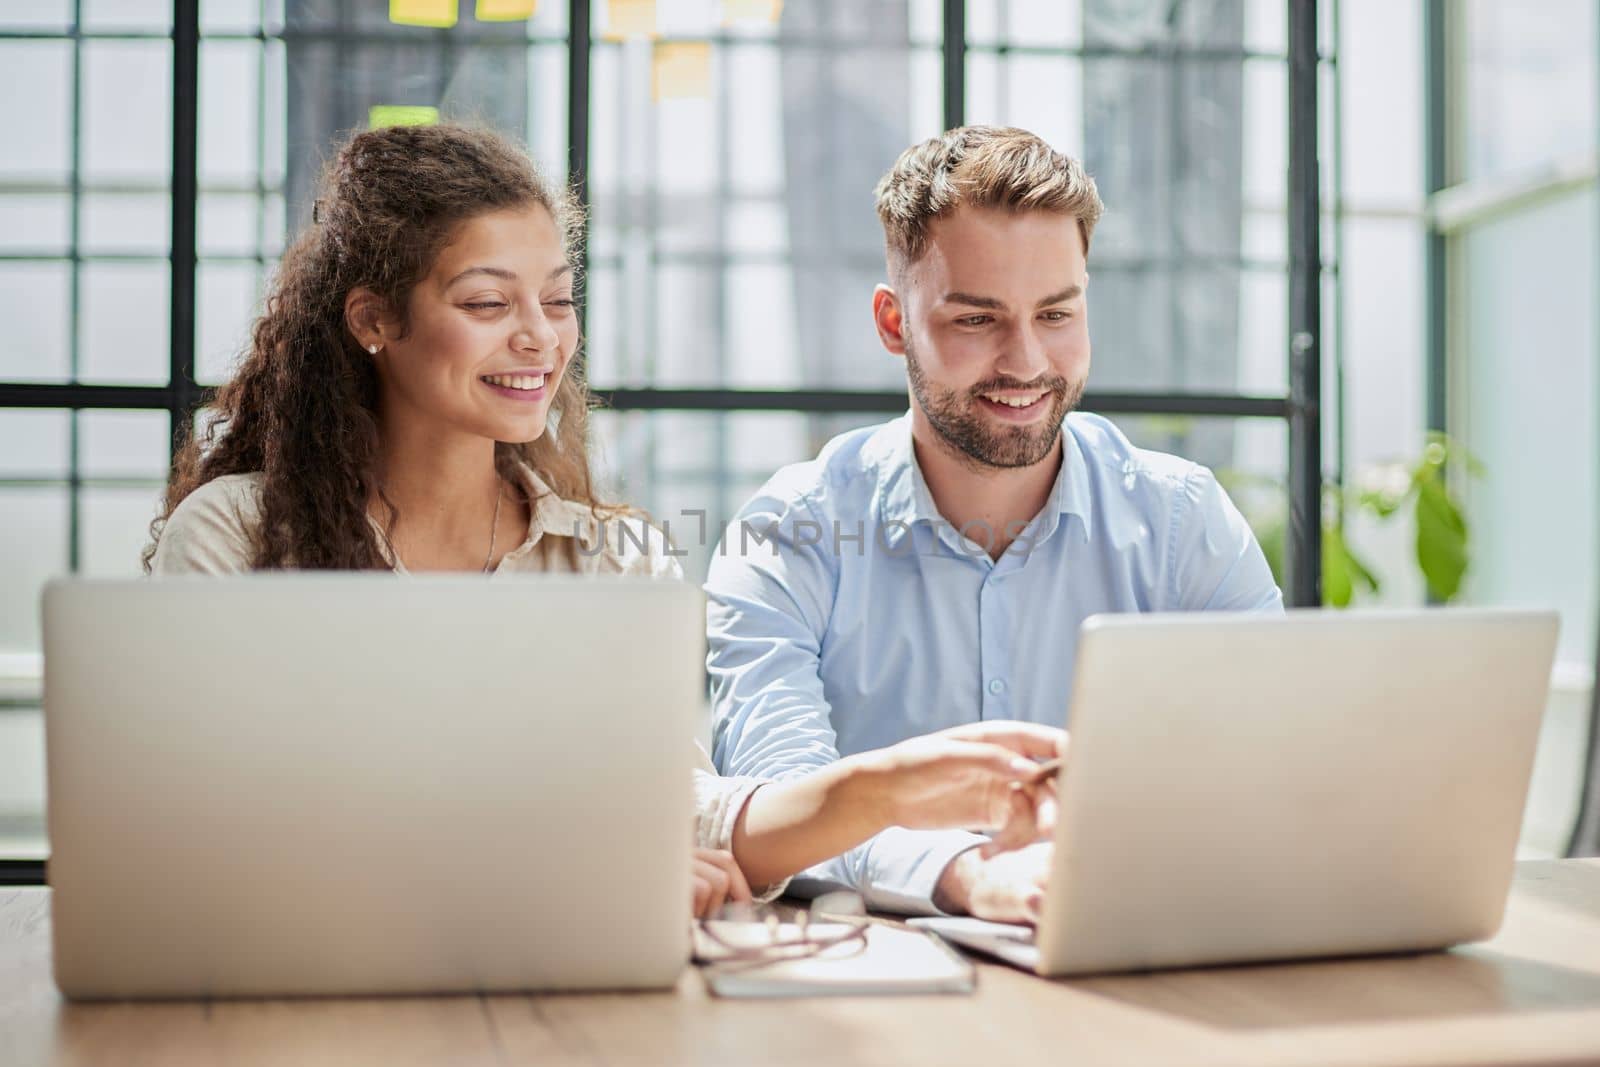 Attractive man and charming woman is pointing at the laptop screen, laughing together, resting by Prosto